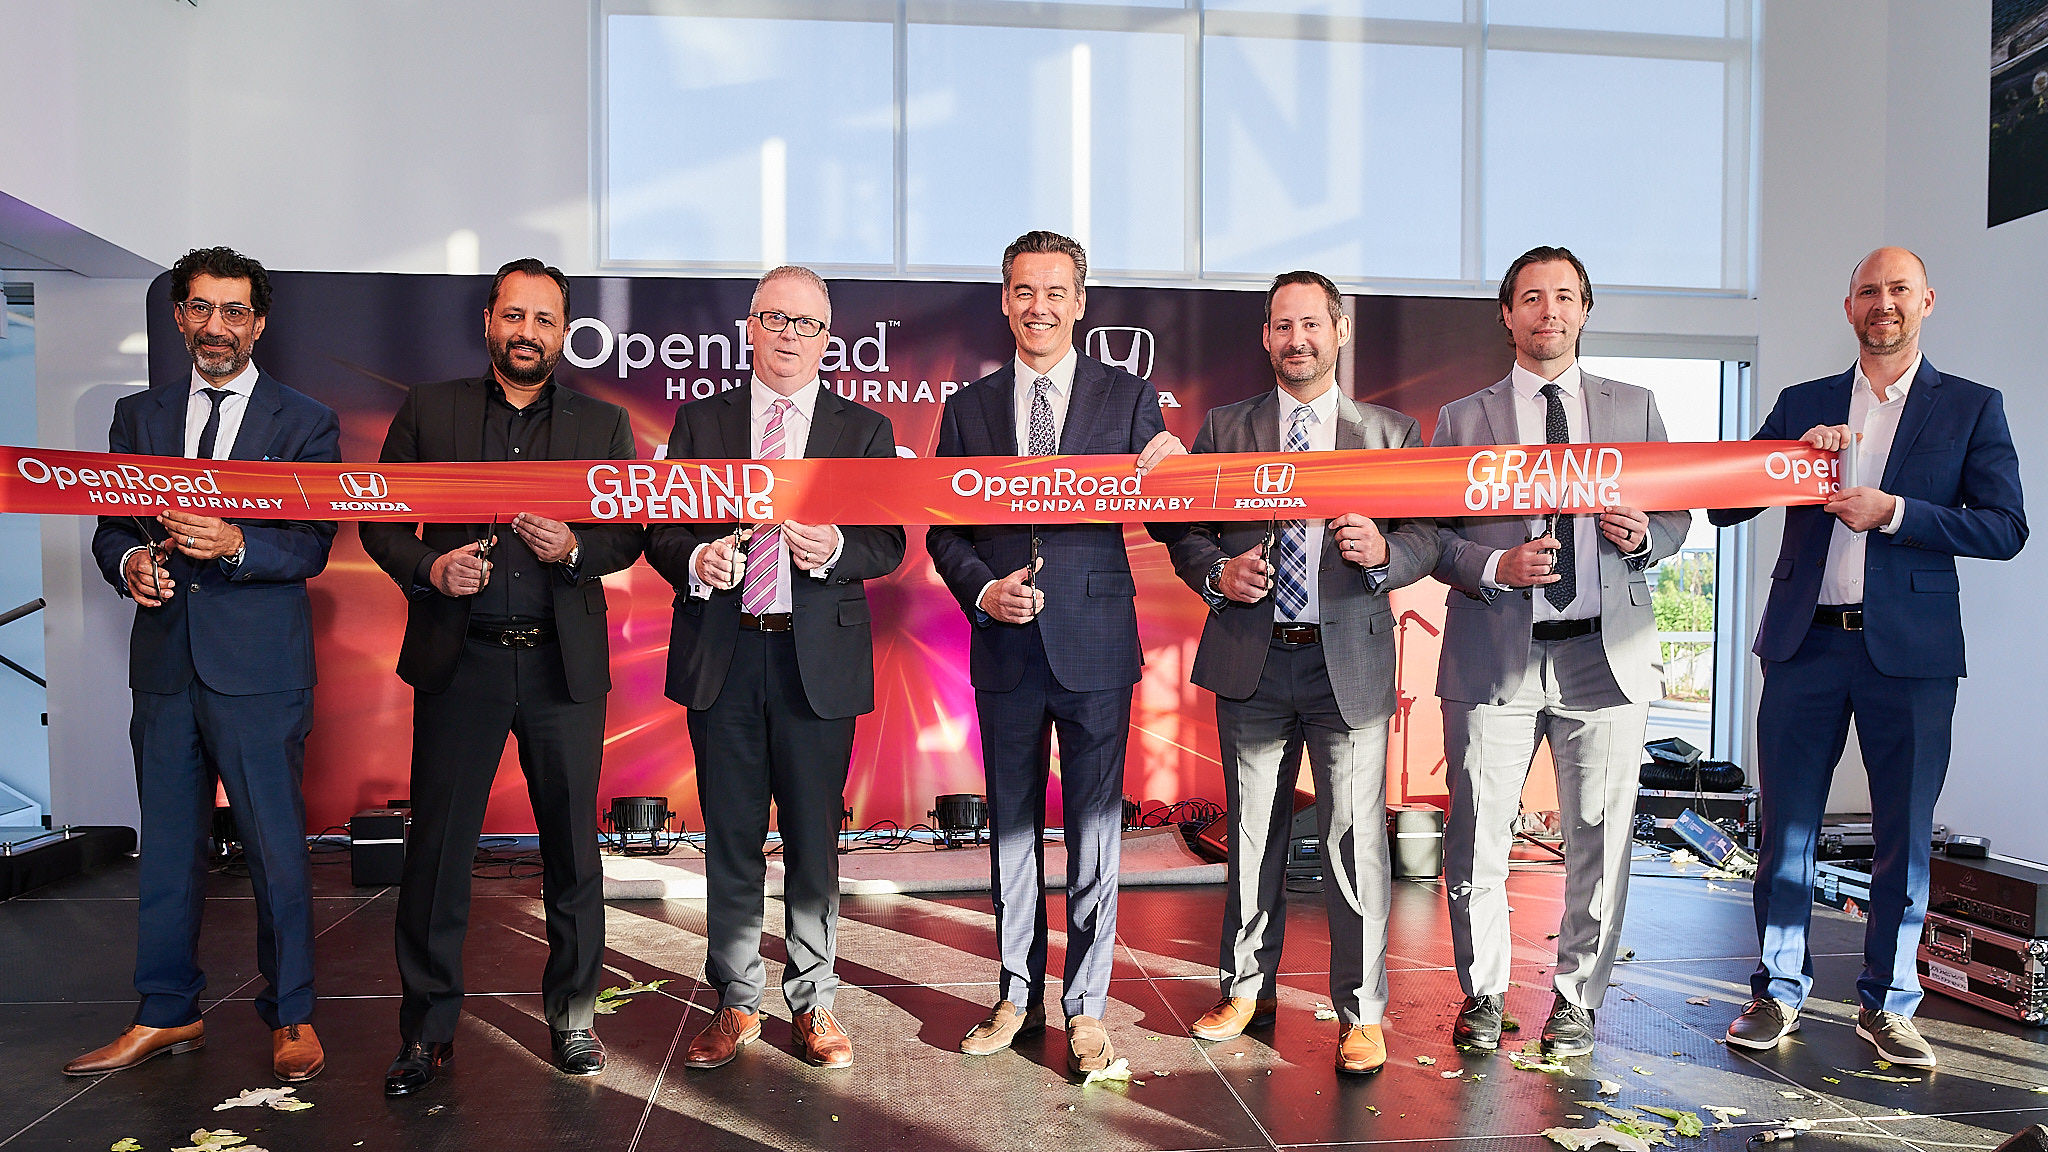 Electric Dreams: A Very Grand Opening for OpenRoad Honda Burnaby